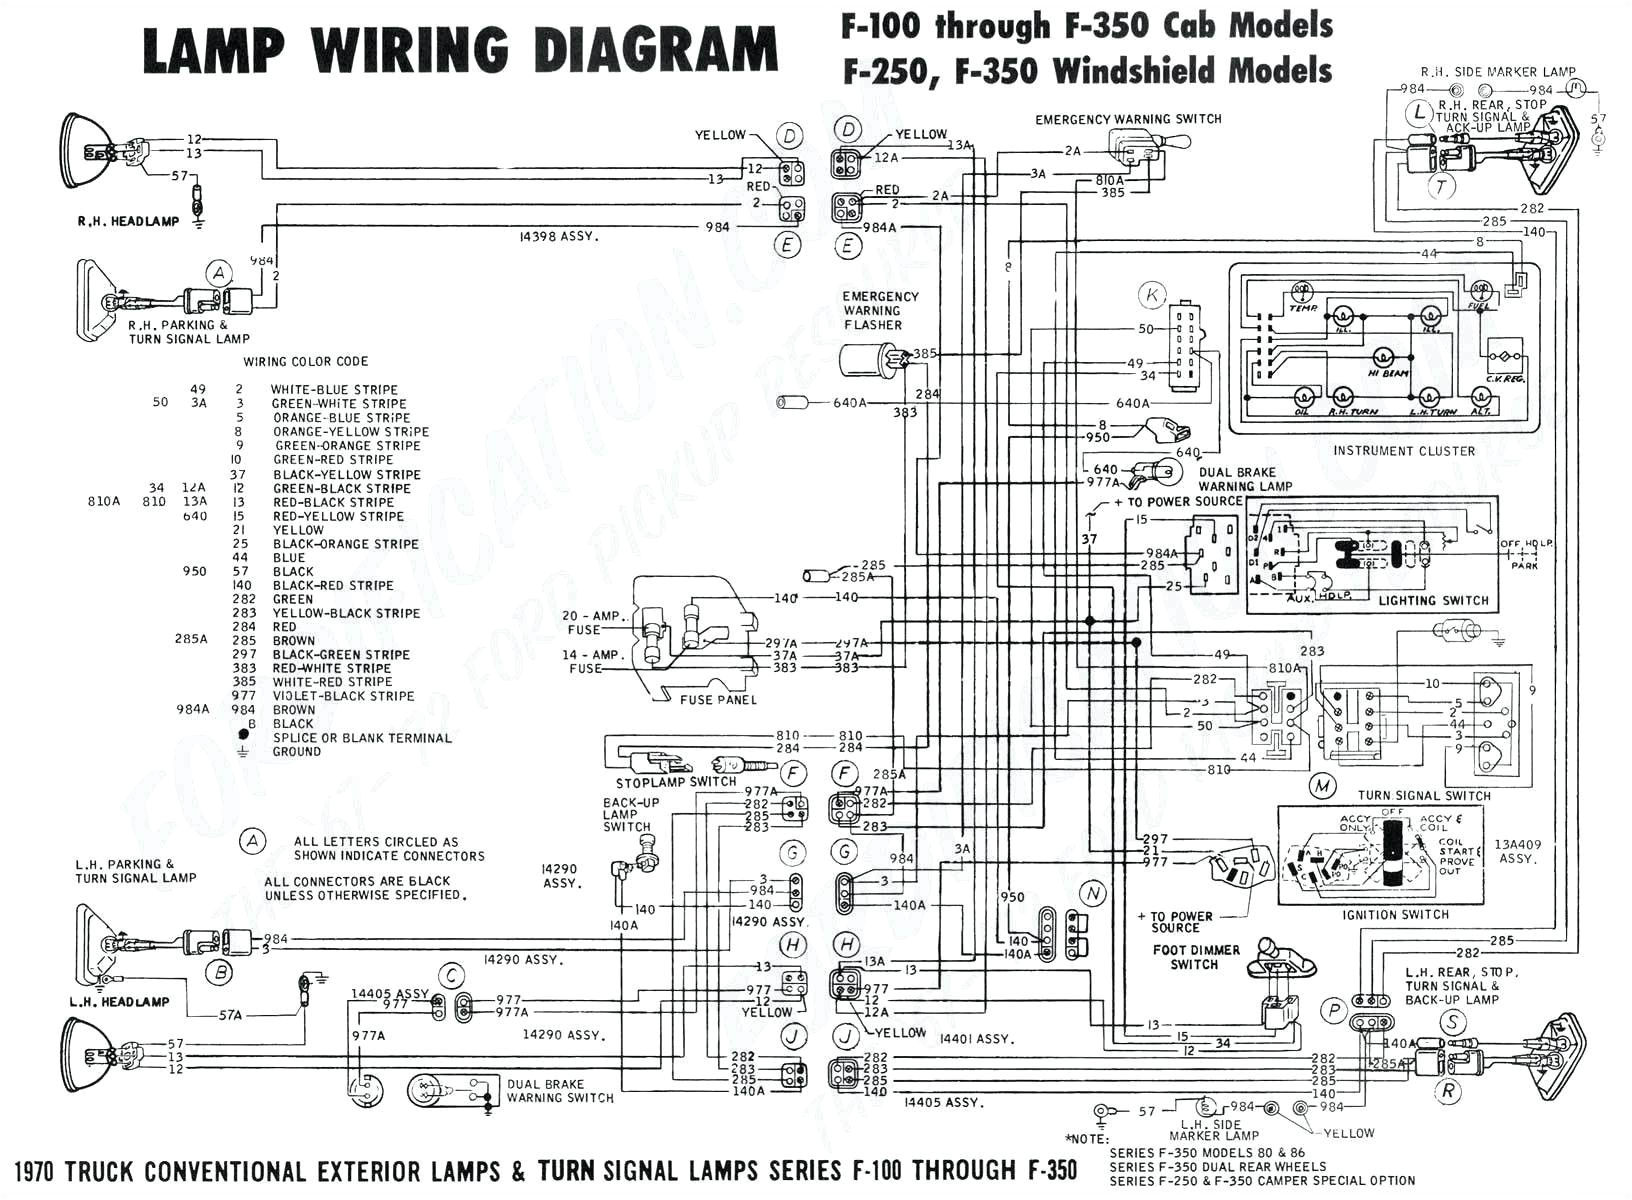 ford wiring diagram 2002 wiring diagram post ford focus wiring diagram 2002 2002 ford e150 wiring